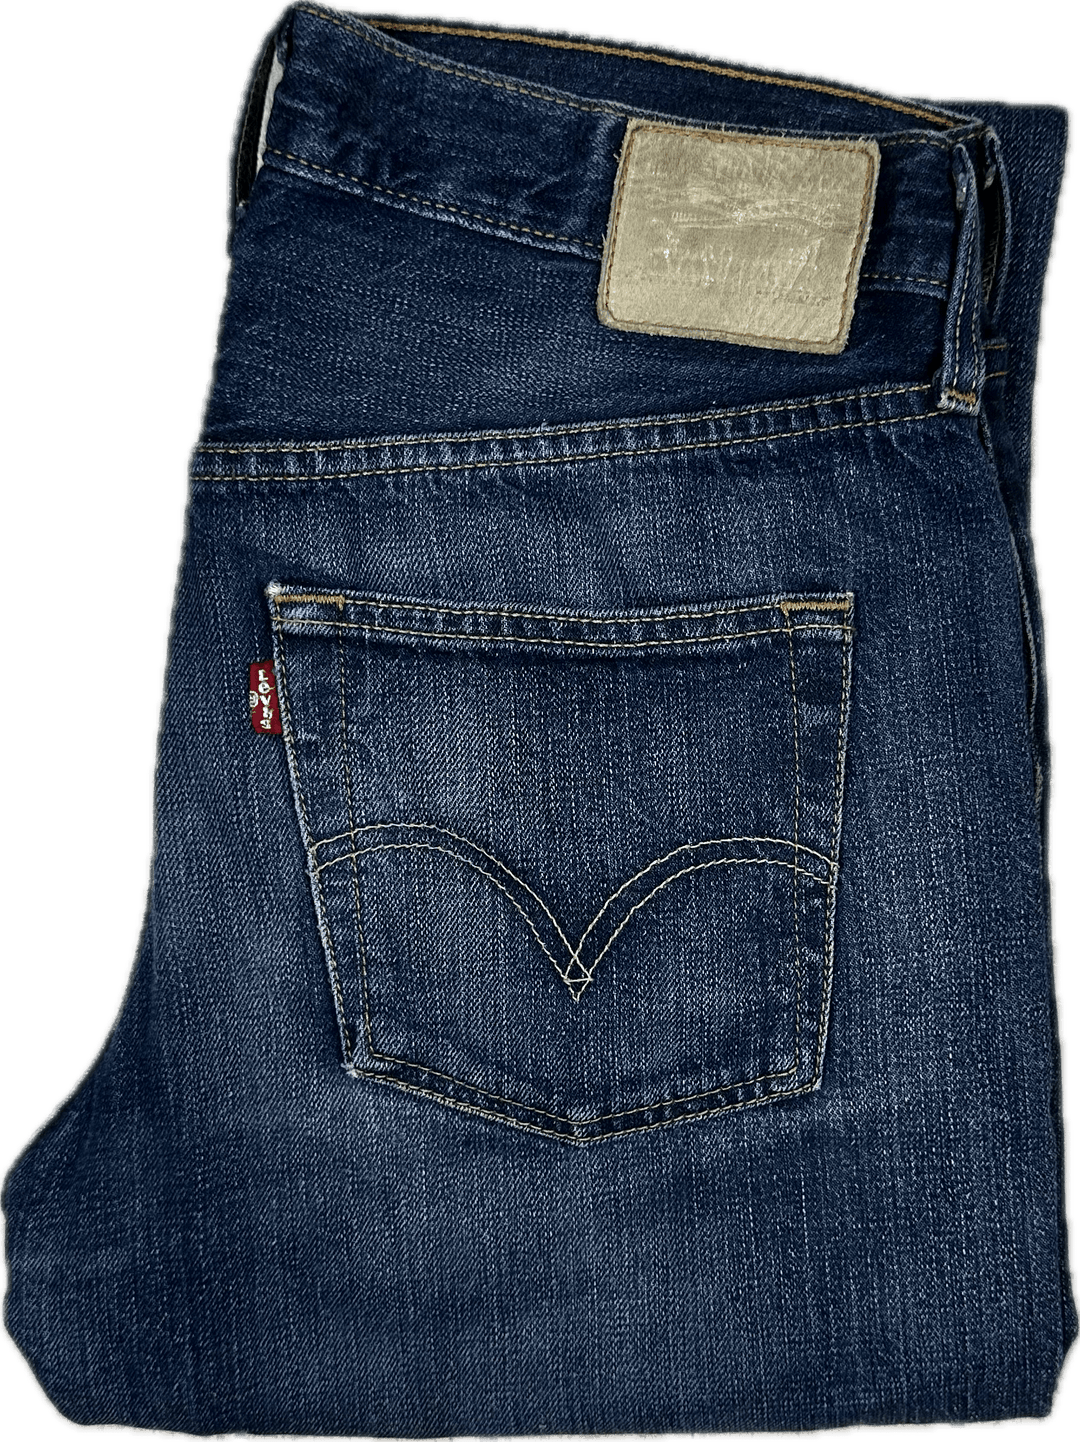 Levis Ladies Classic Button Fly Ankle Jeans -Size 9 or 27" - Jean Pool